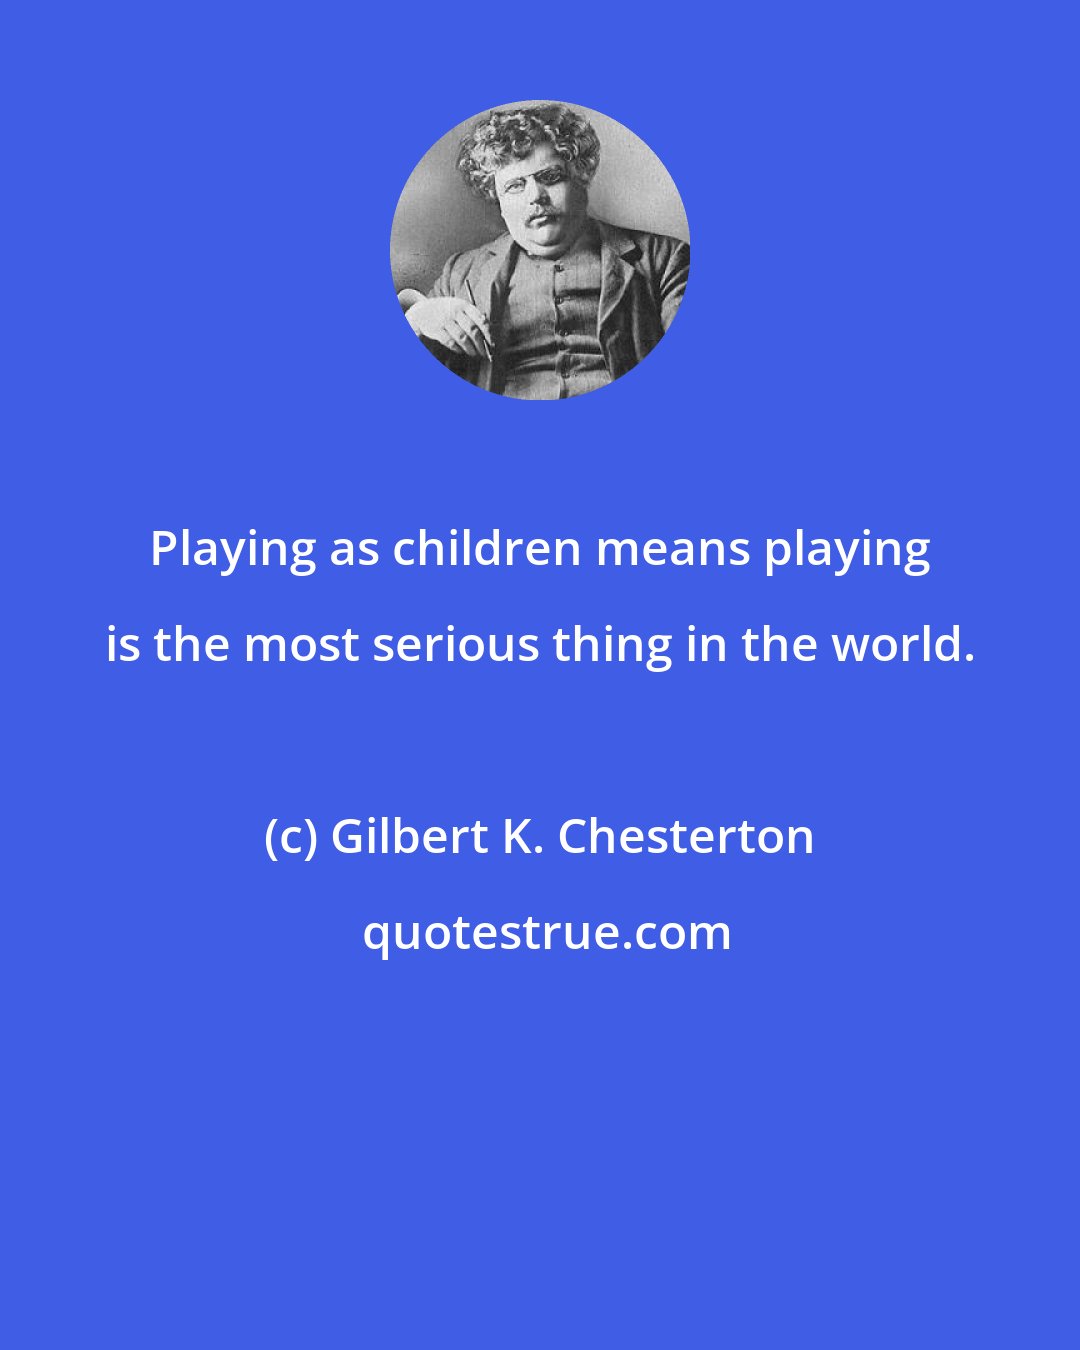 Gilbert K. Chesterton: Playing as children means playing is the most serious thing in the world.